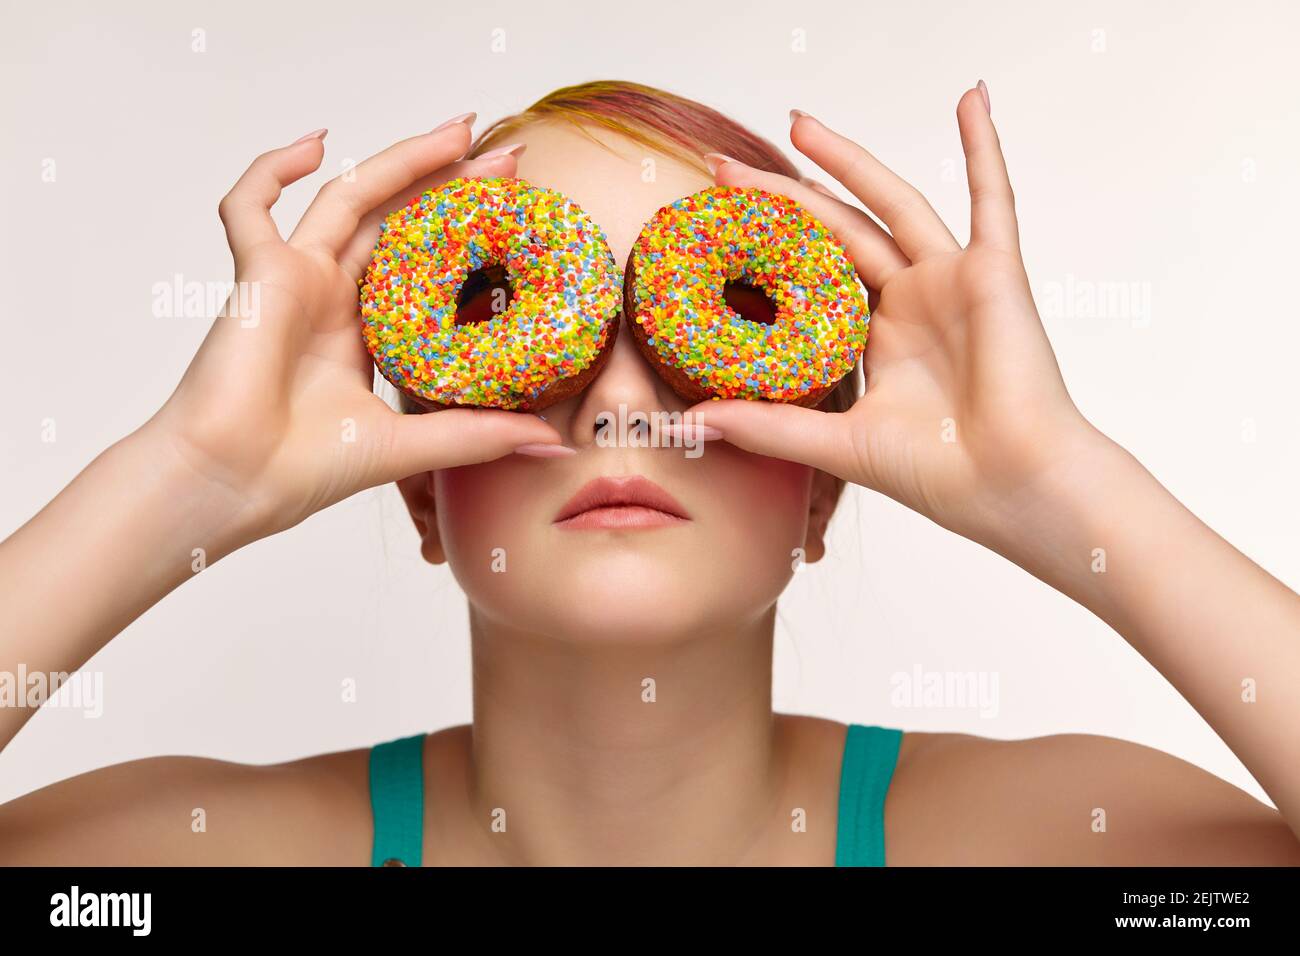 Teenager girl with unusual face art make-up . Child with donuts in hands closing eyes and looking through holes in donuts. Sweet tooth concept. Stock Photo